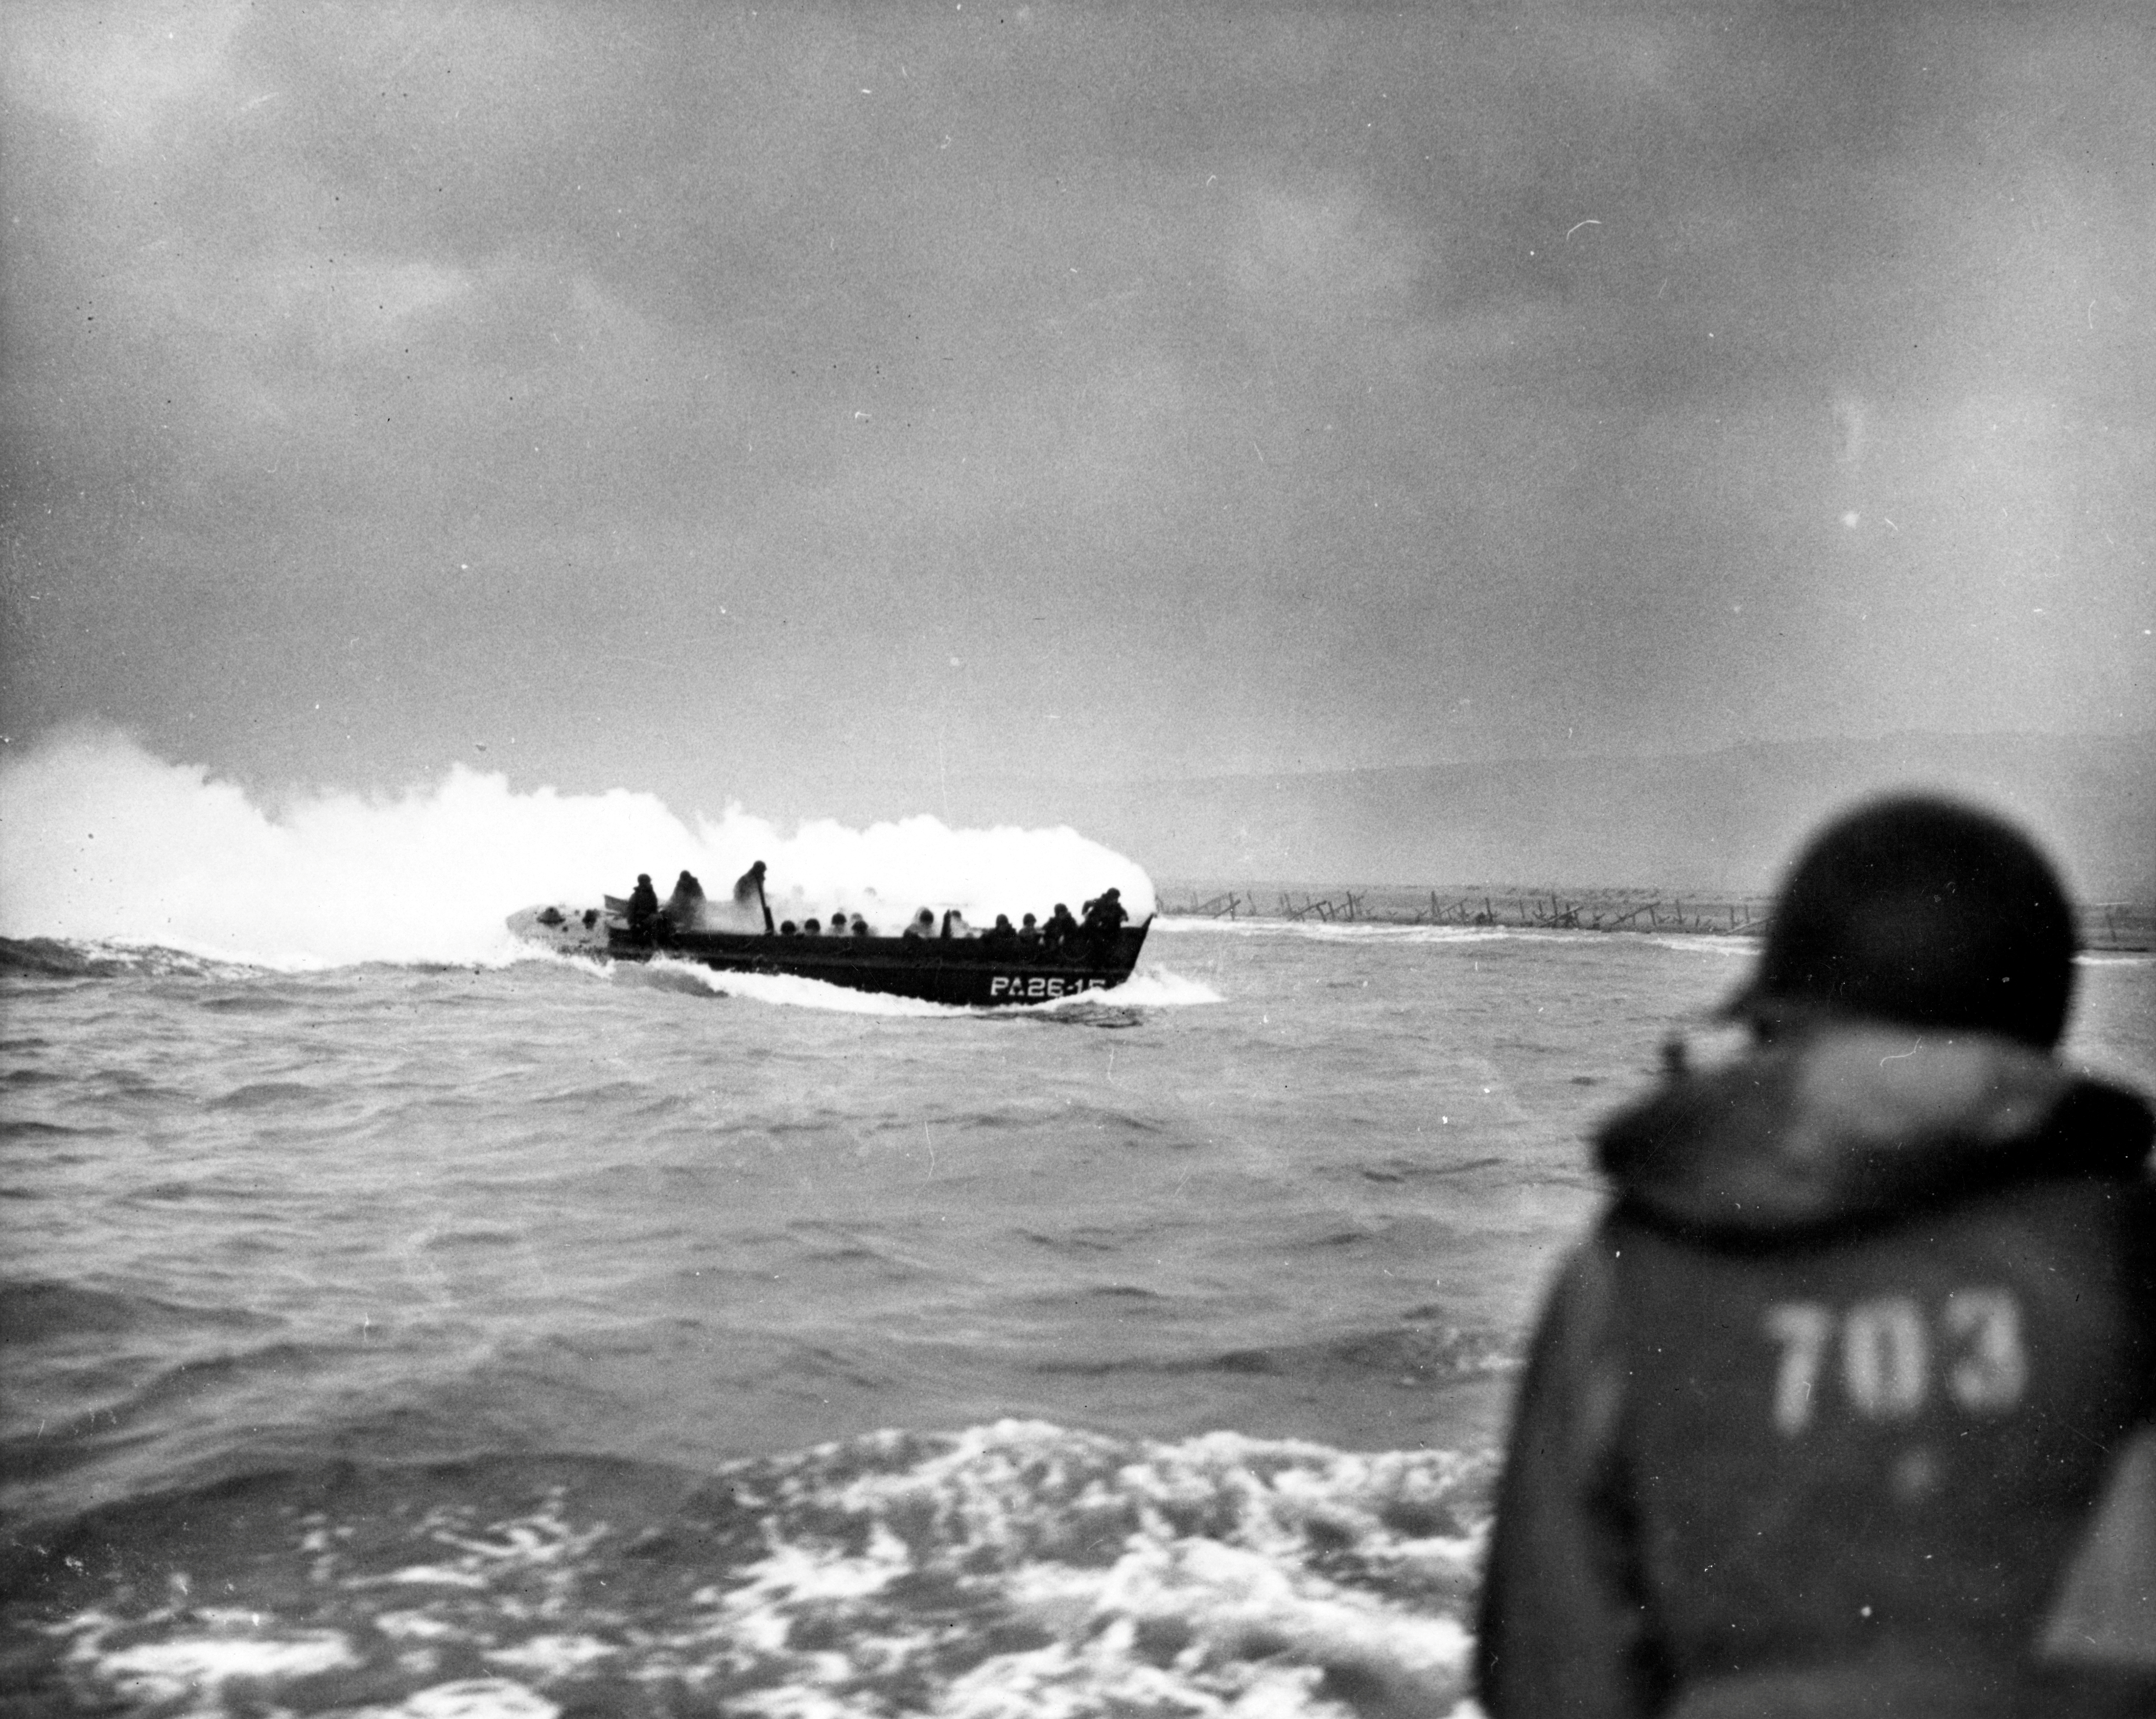 A LCVP landing craft from the U.S. Coast Guard attack transport USS Samuel Chase approaches Omaha Beach on D-Day in Colleville Sur-Mer